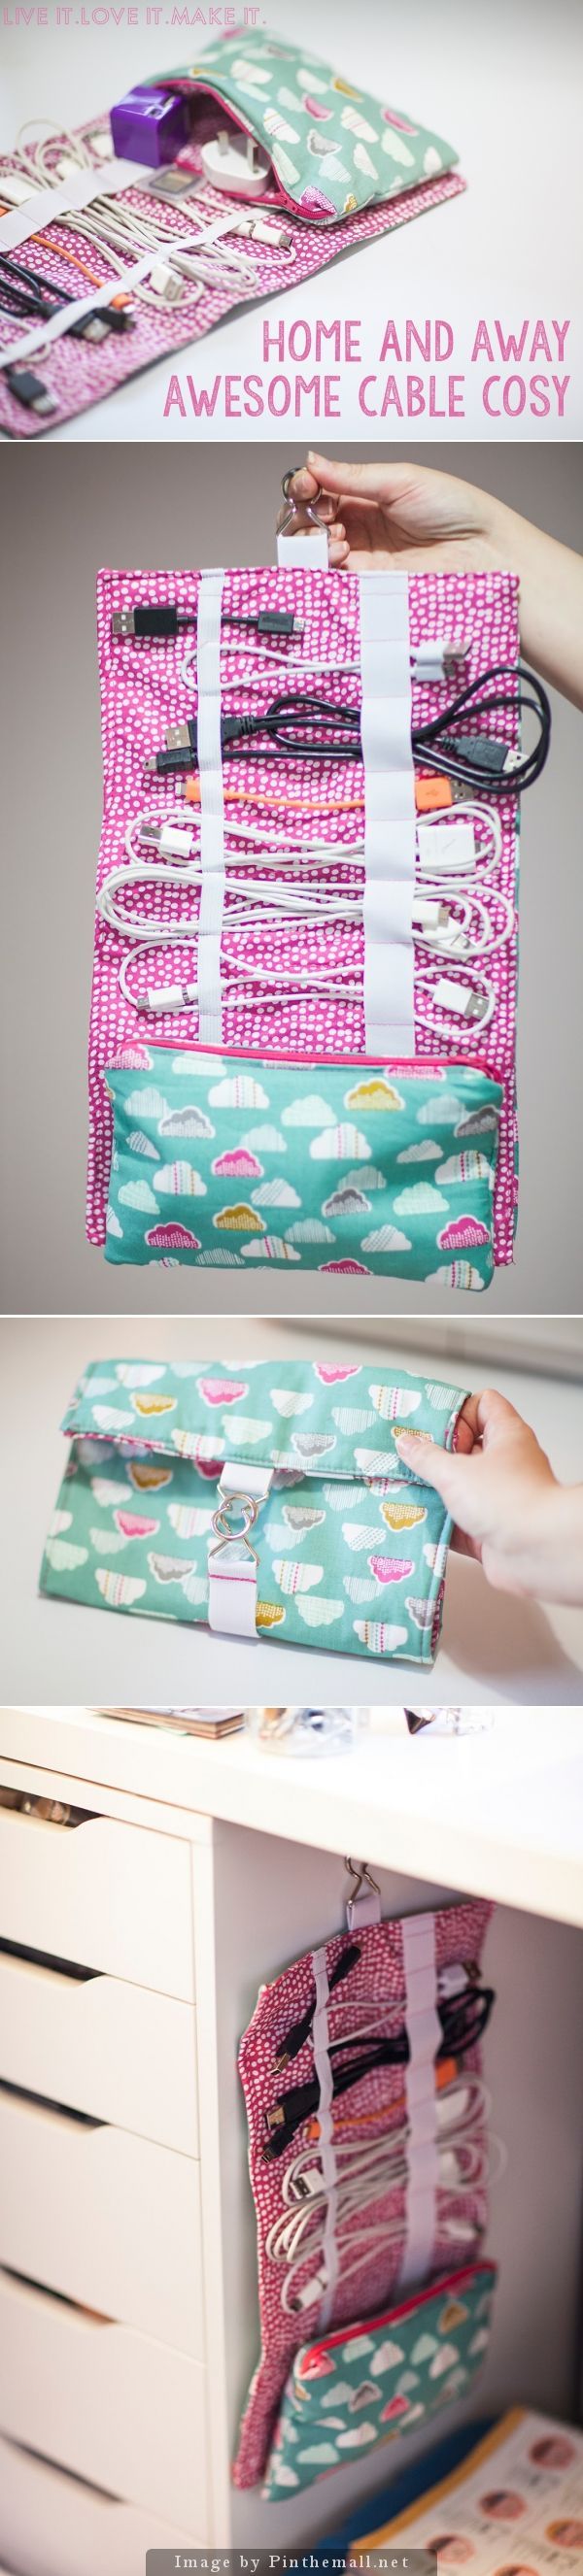 “Cable Cord Cozy – Clear tutorial including a free PDF download for how to make this useful bag for yo